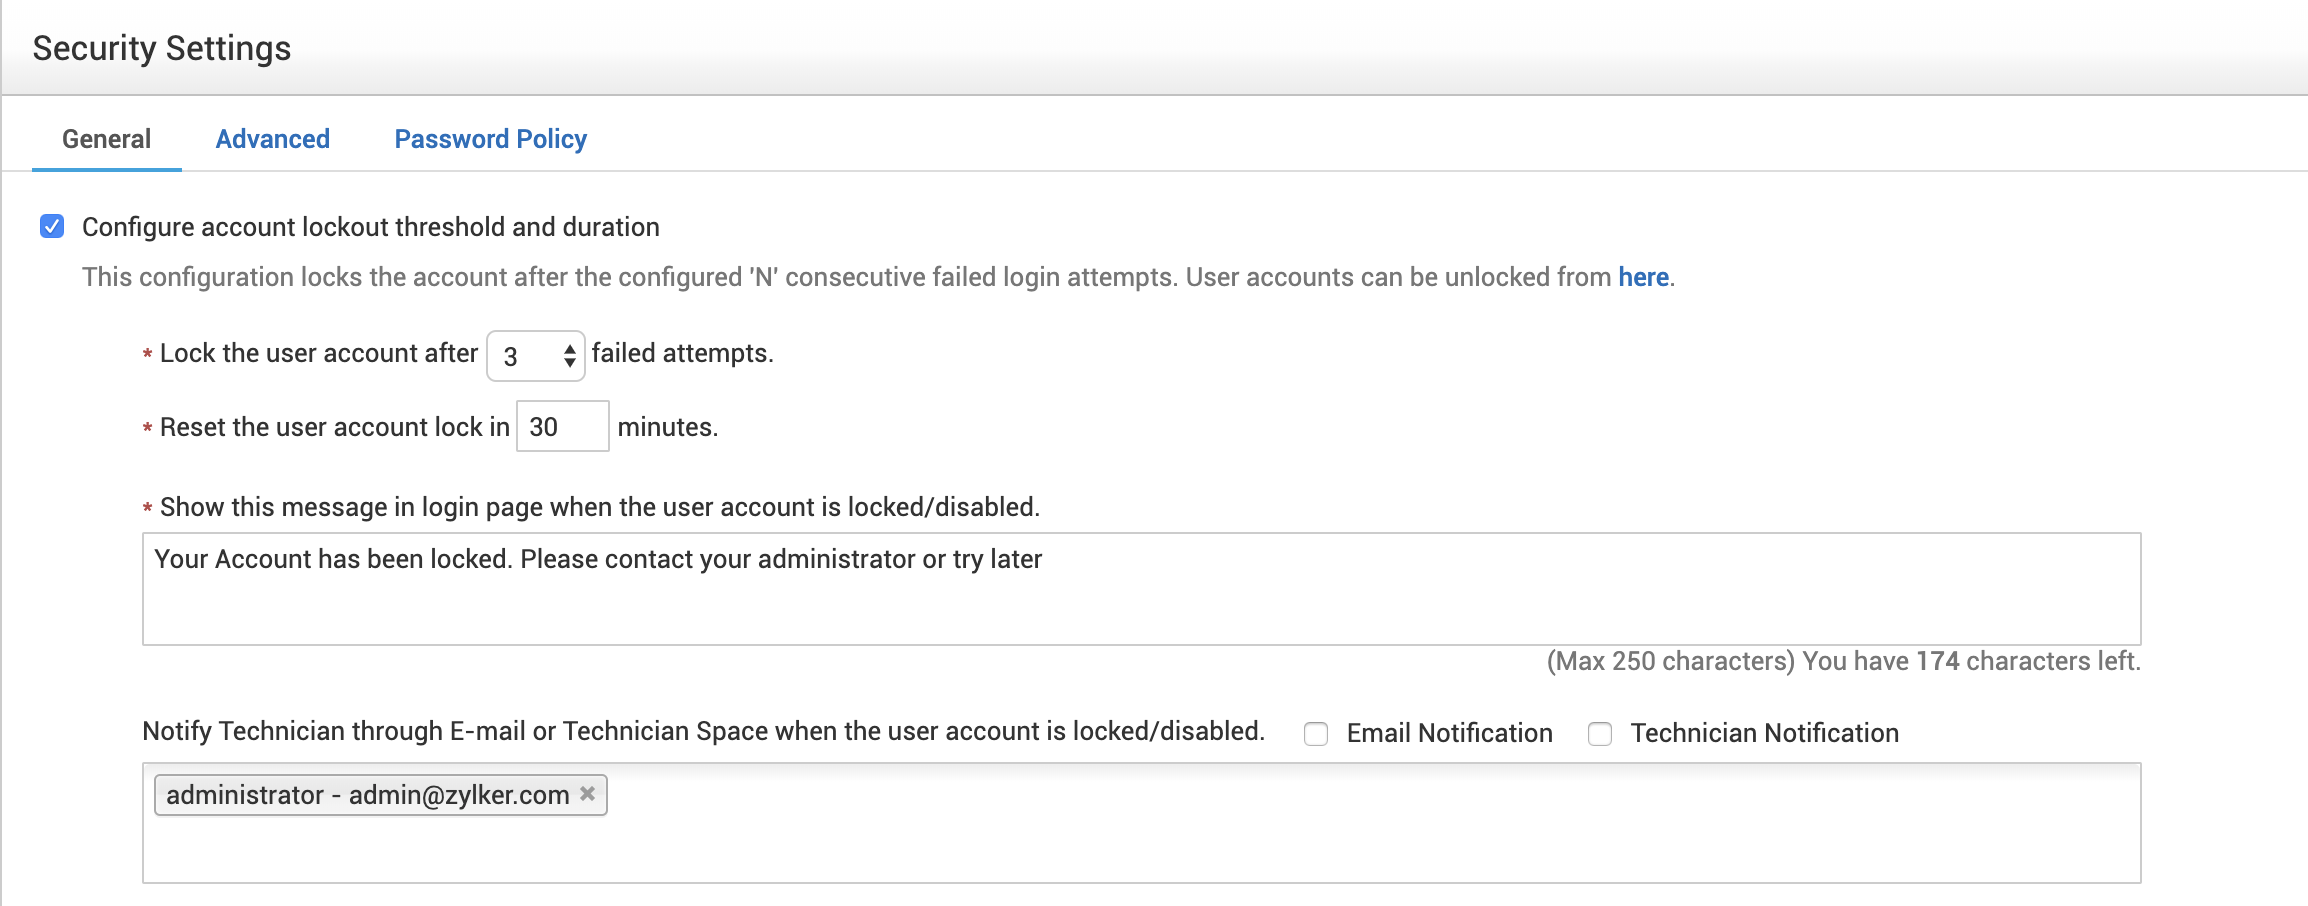 Security: locked out of account after failed login attempts